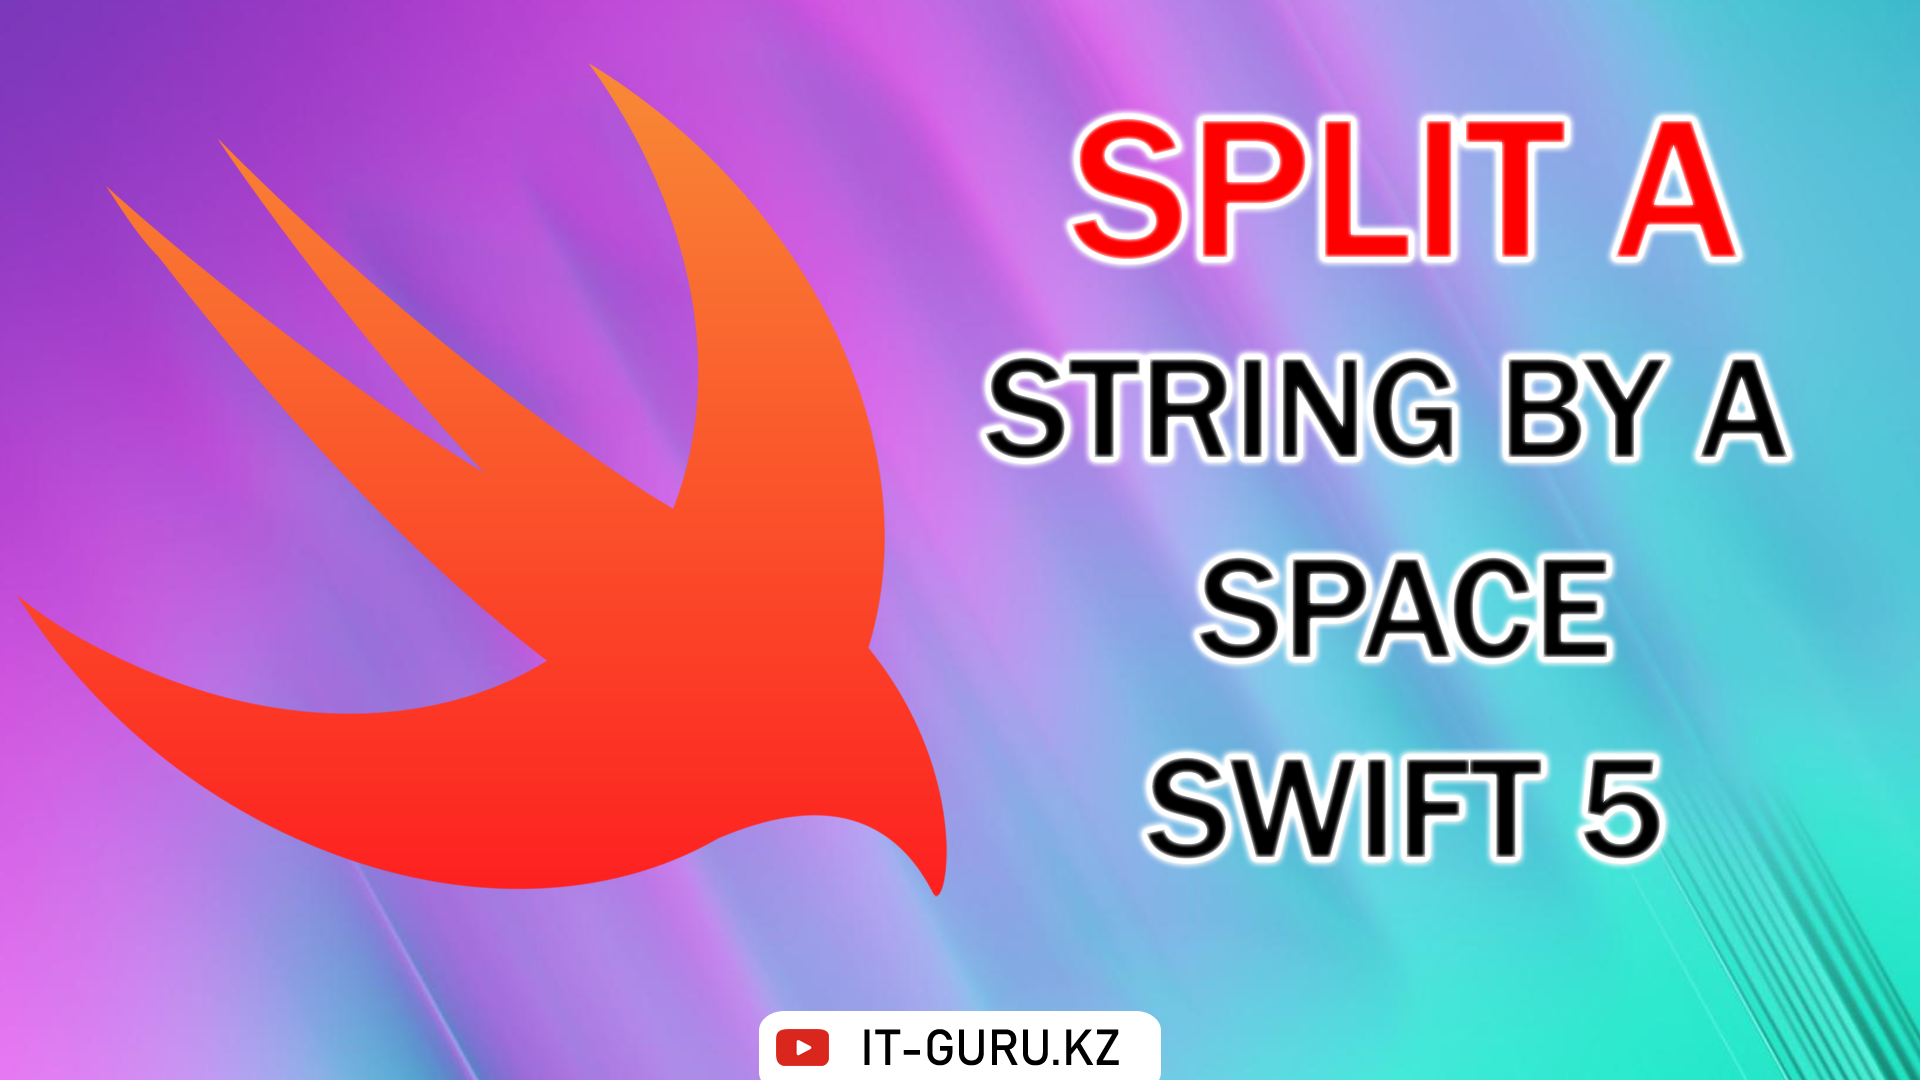 How to split a string by a space - Swift 5